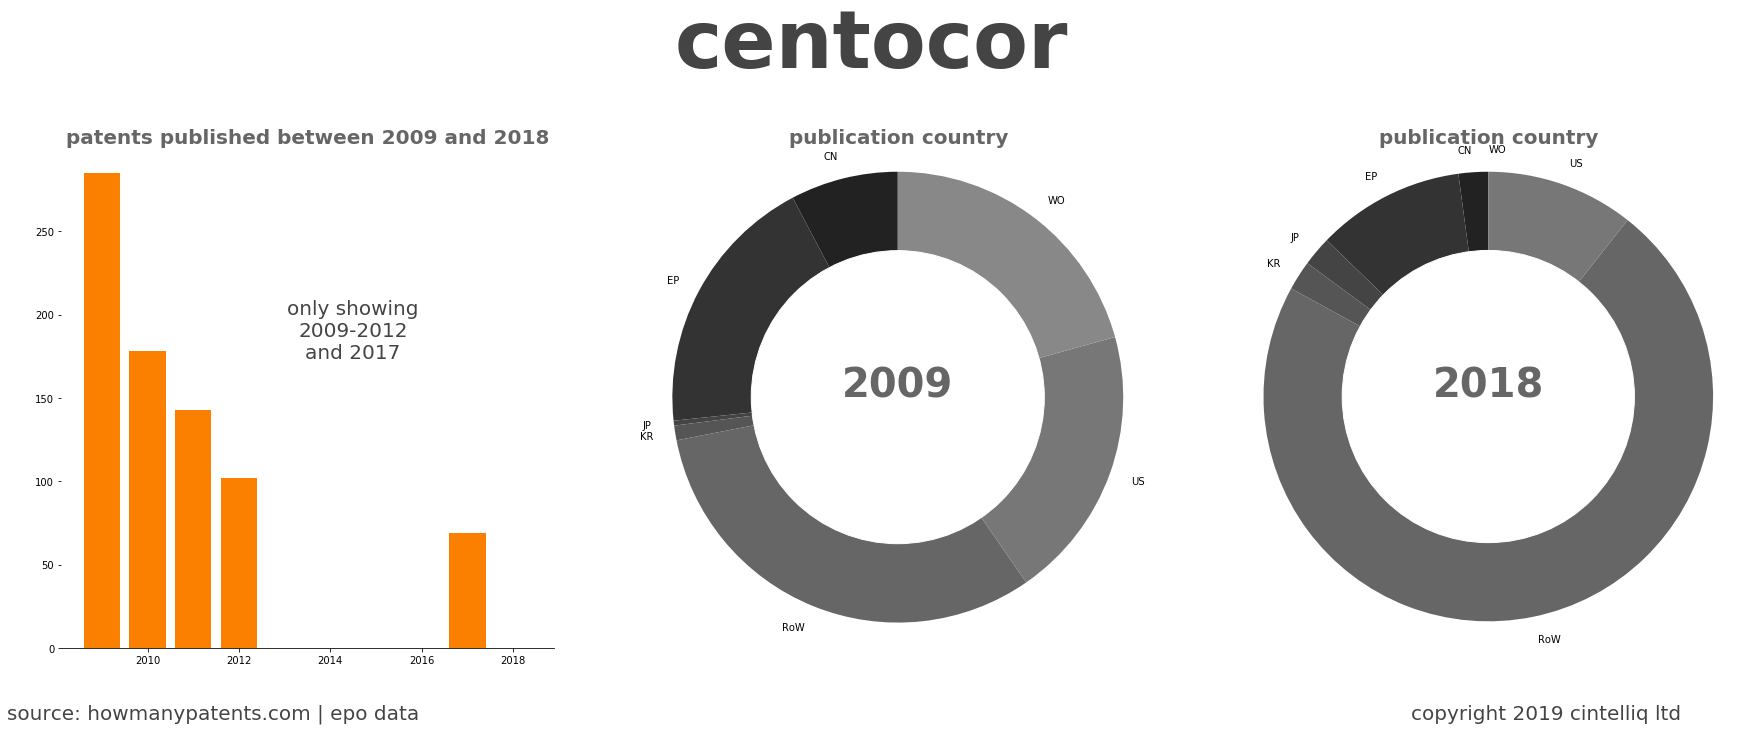 summary of patents for Centocor